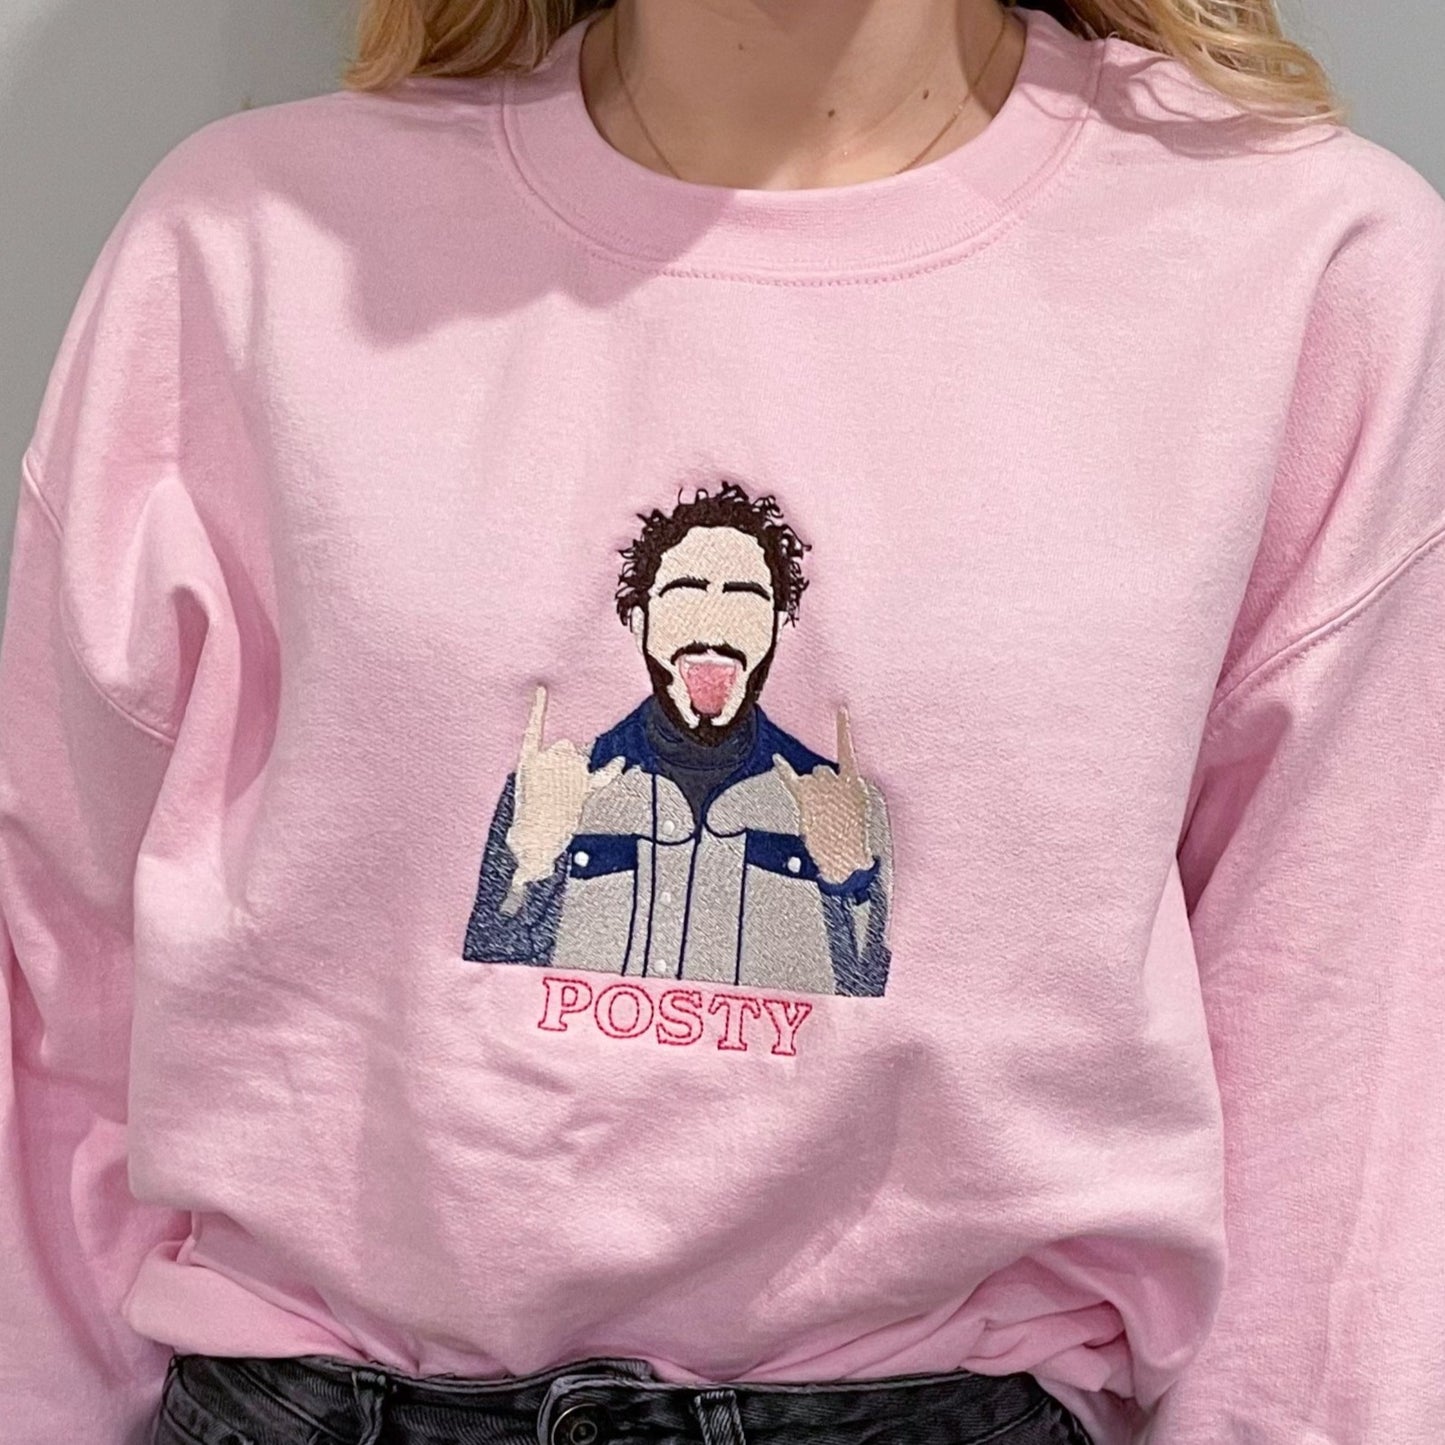 Post Malone Pink Embroidered Crewneck